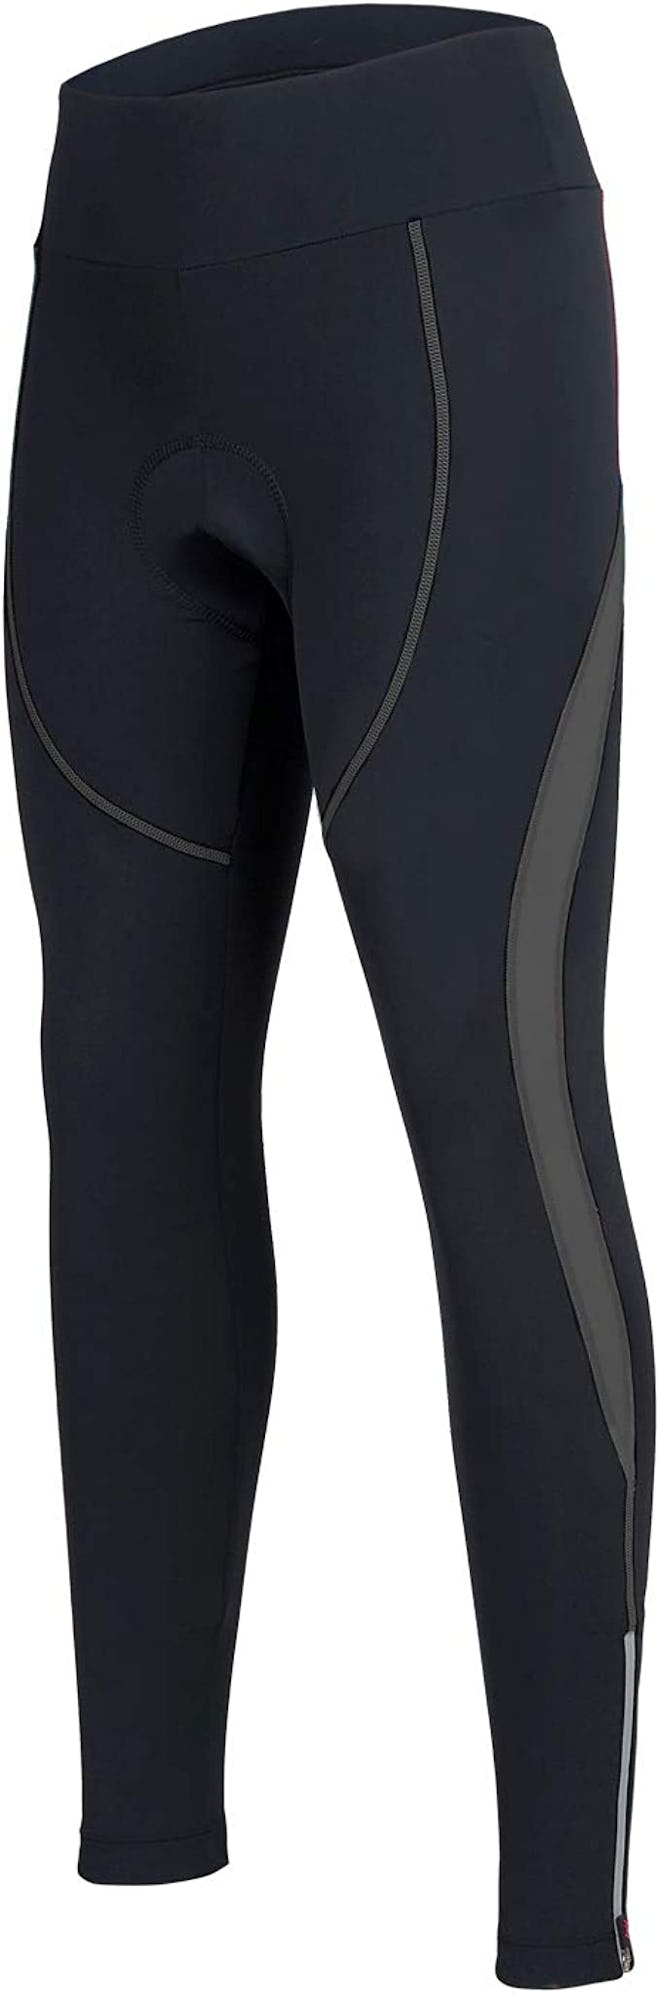 SPOEAR 3D Padded Cycling Compression Tights